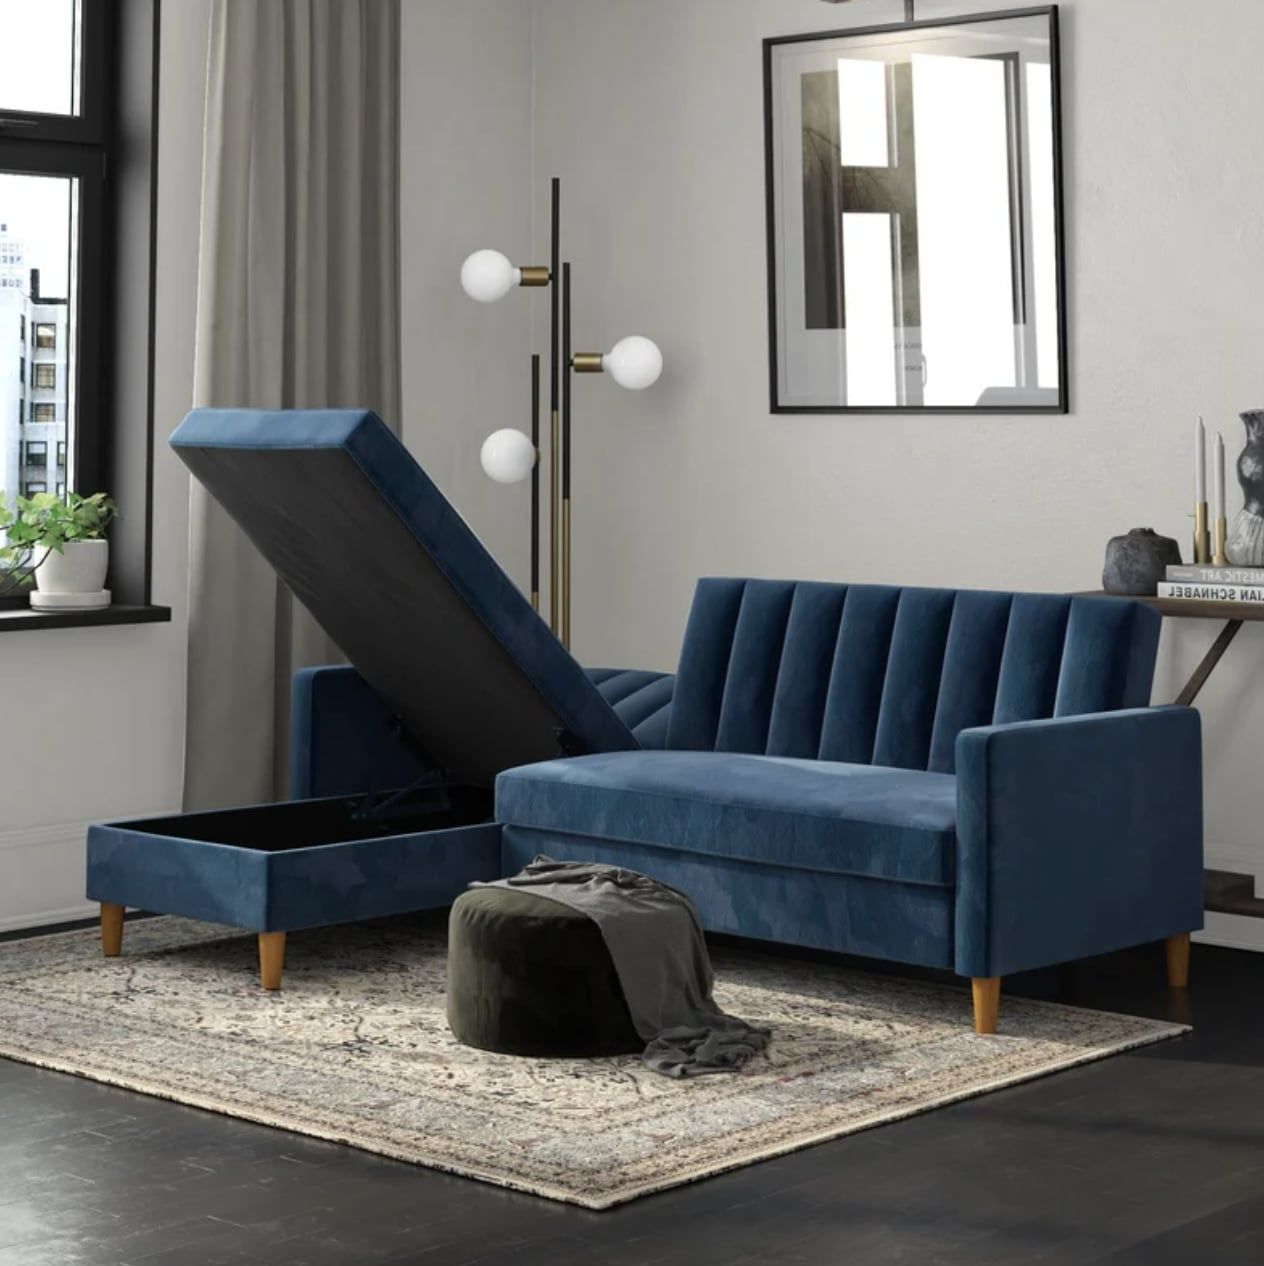 Best And Most Comfortable Sofas With Storage 2022 | Popsugar Home Within Convertible Sofa With Matching Chaise (View 6 of 20)